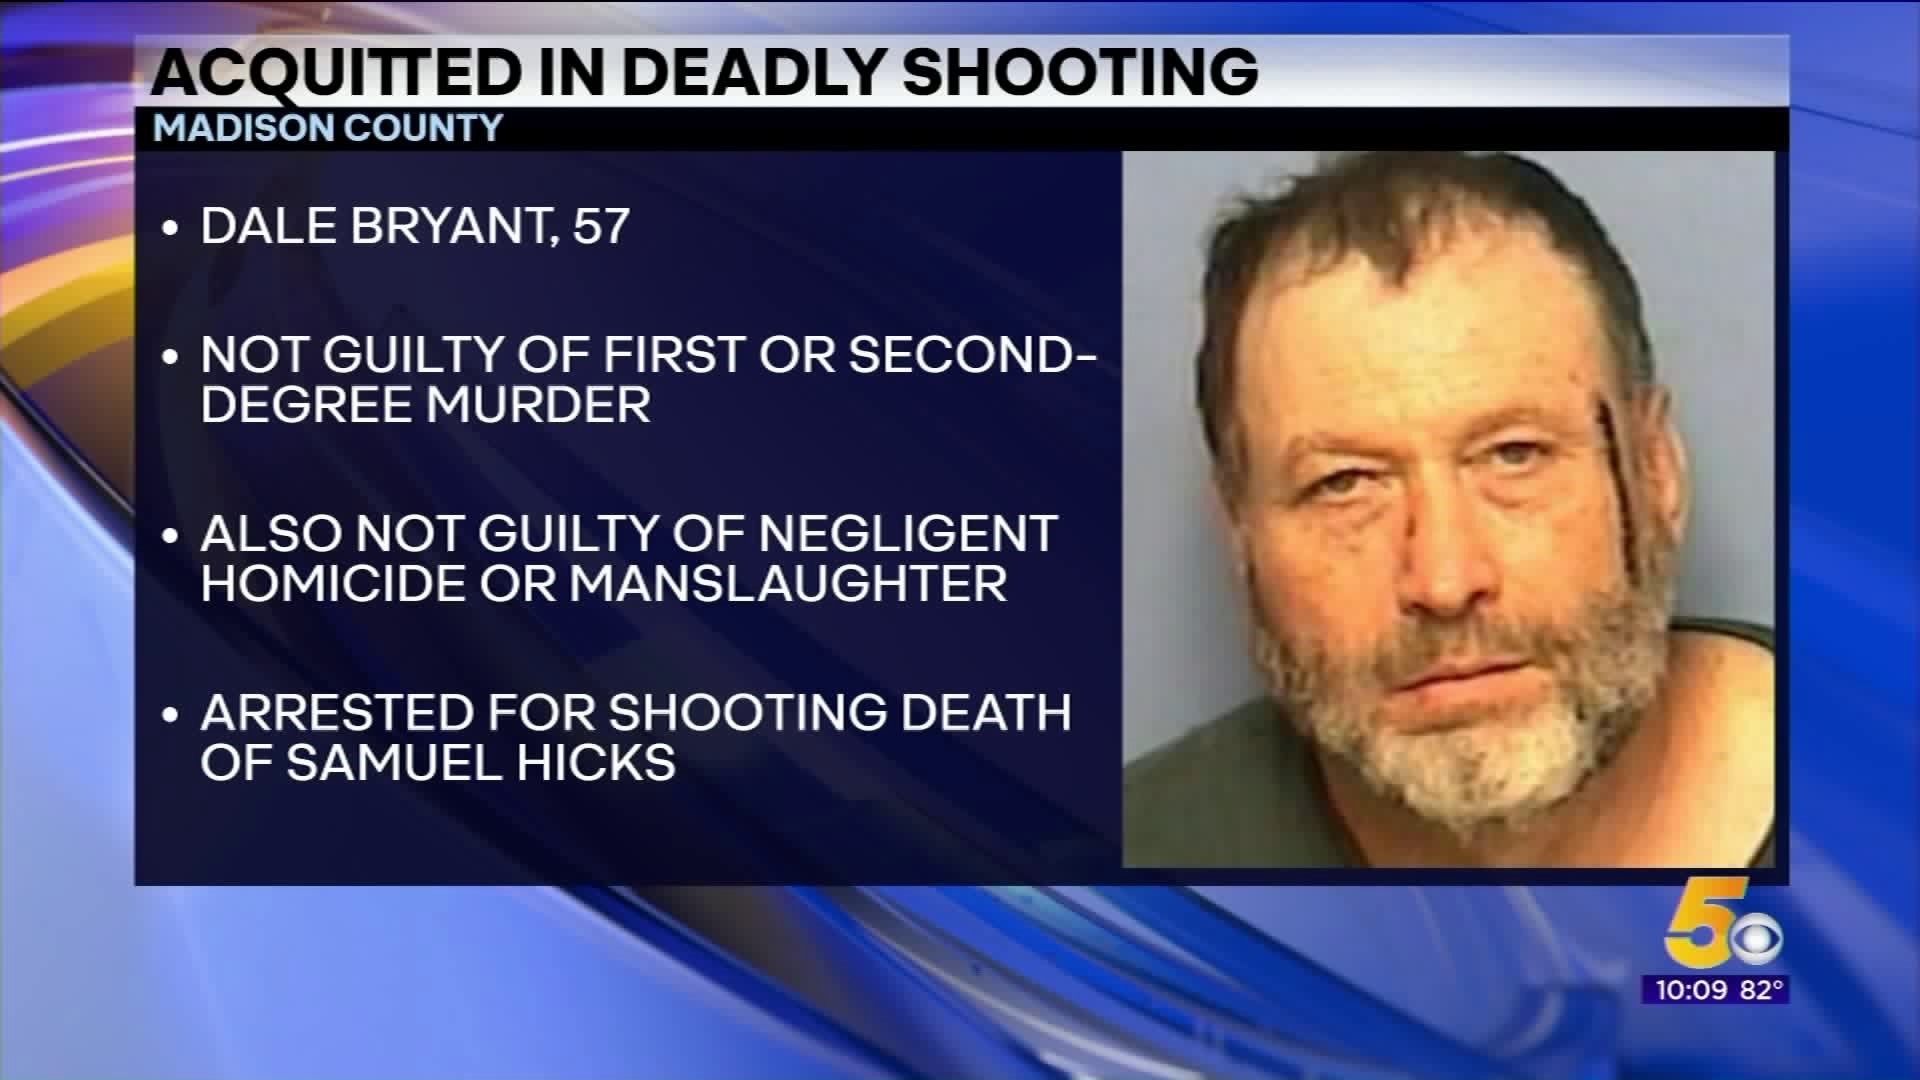 Madison County Man Acquitted in Deadly Shooting